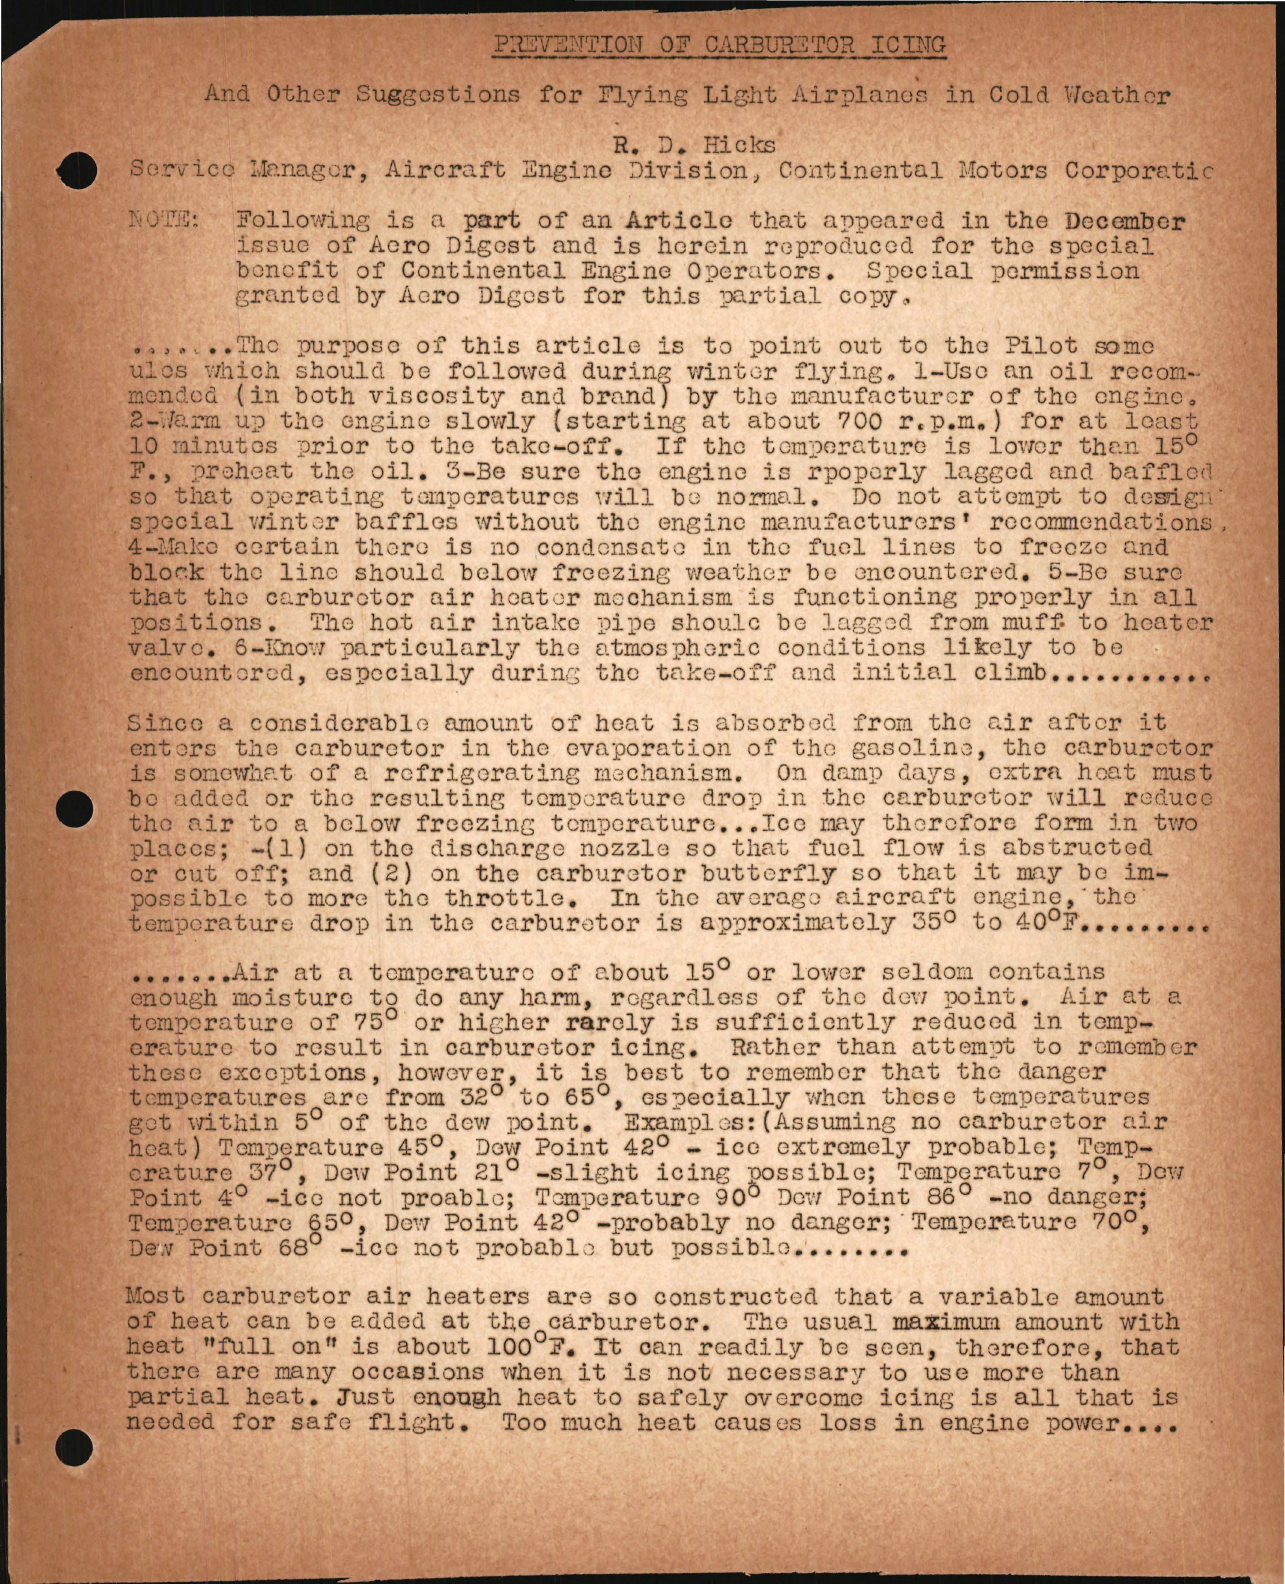 Sample page 1 from AirCorps Library document: Prevention of Carburetor Icing for Flying Light Airplanes in Cold Weather with Continental Motors